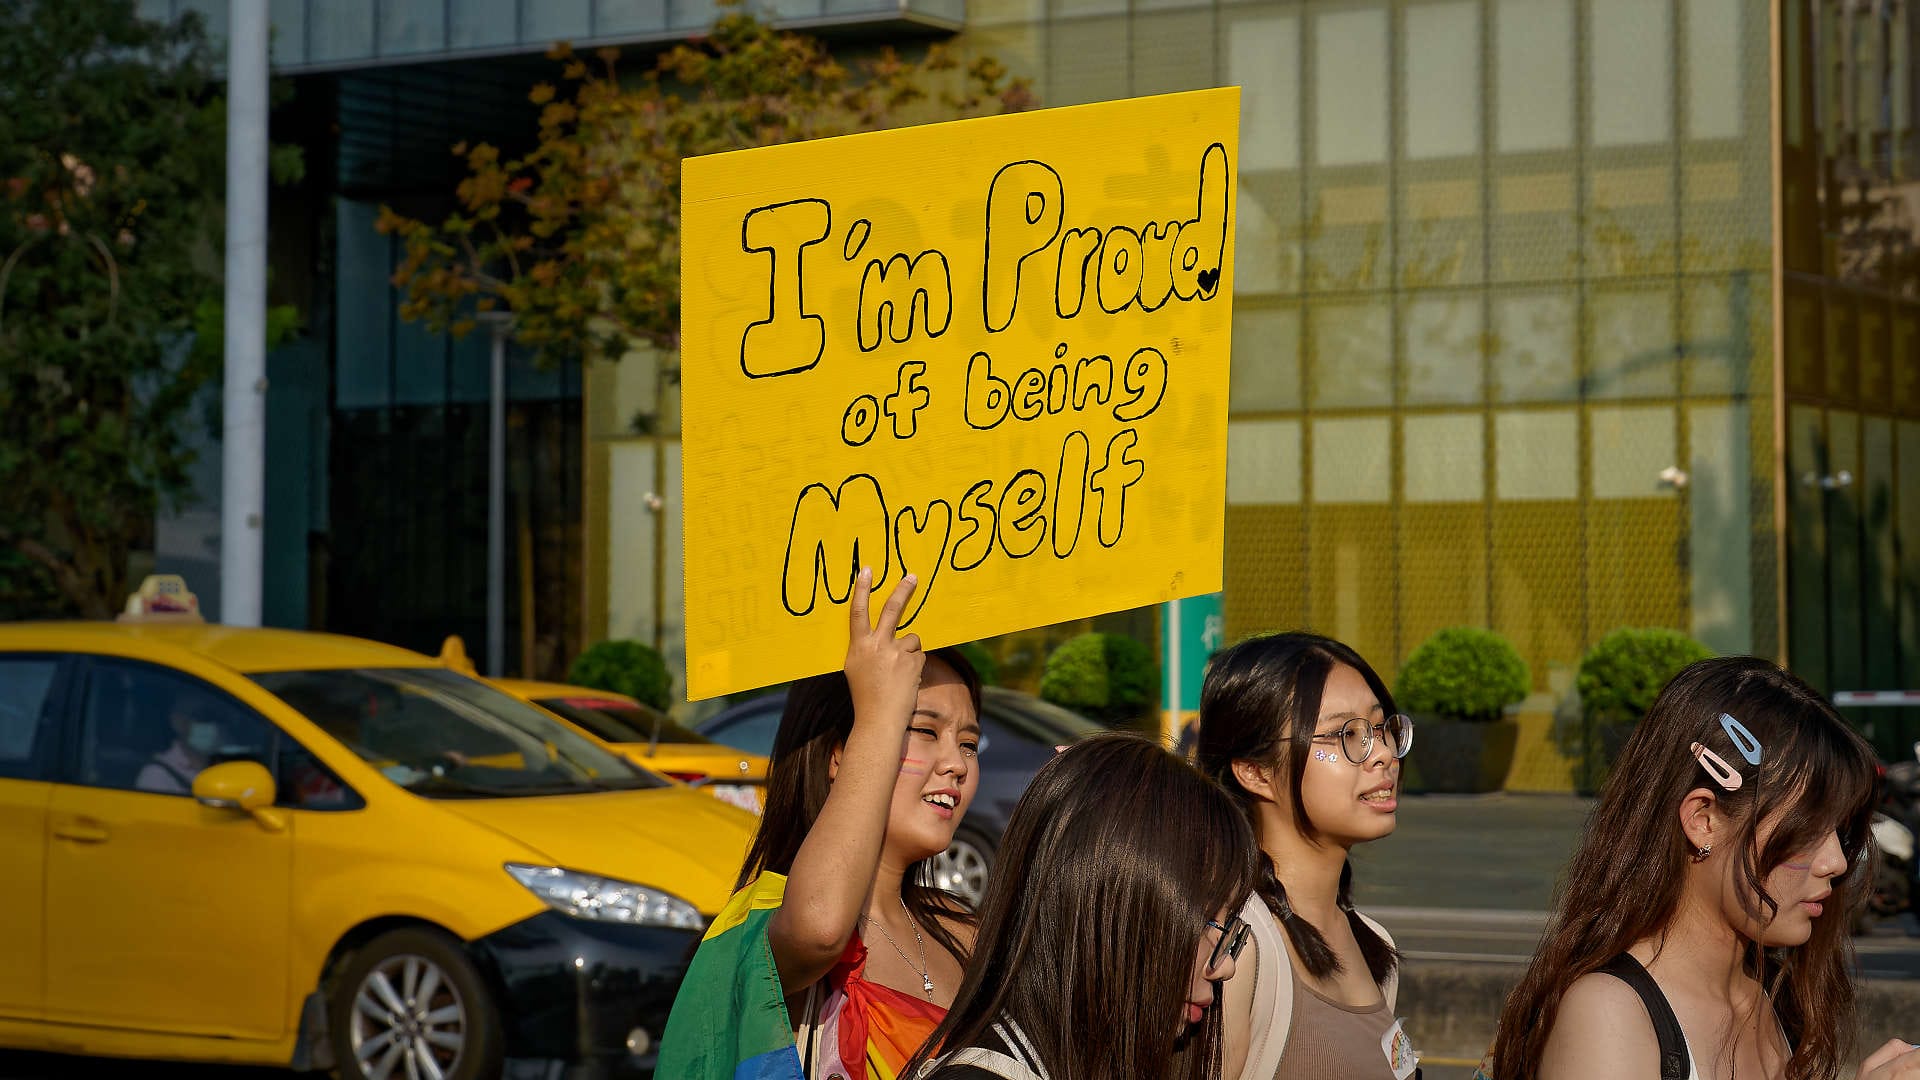 Woman holding a sign that says “I’m proud of being myself”.